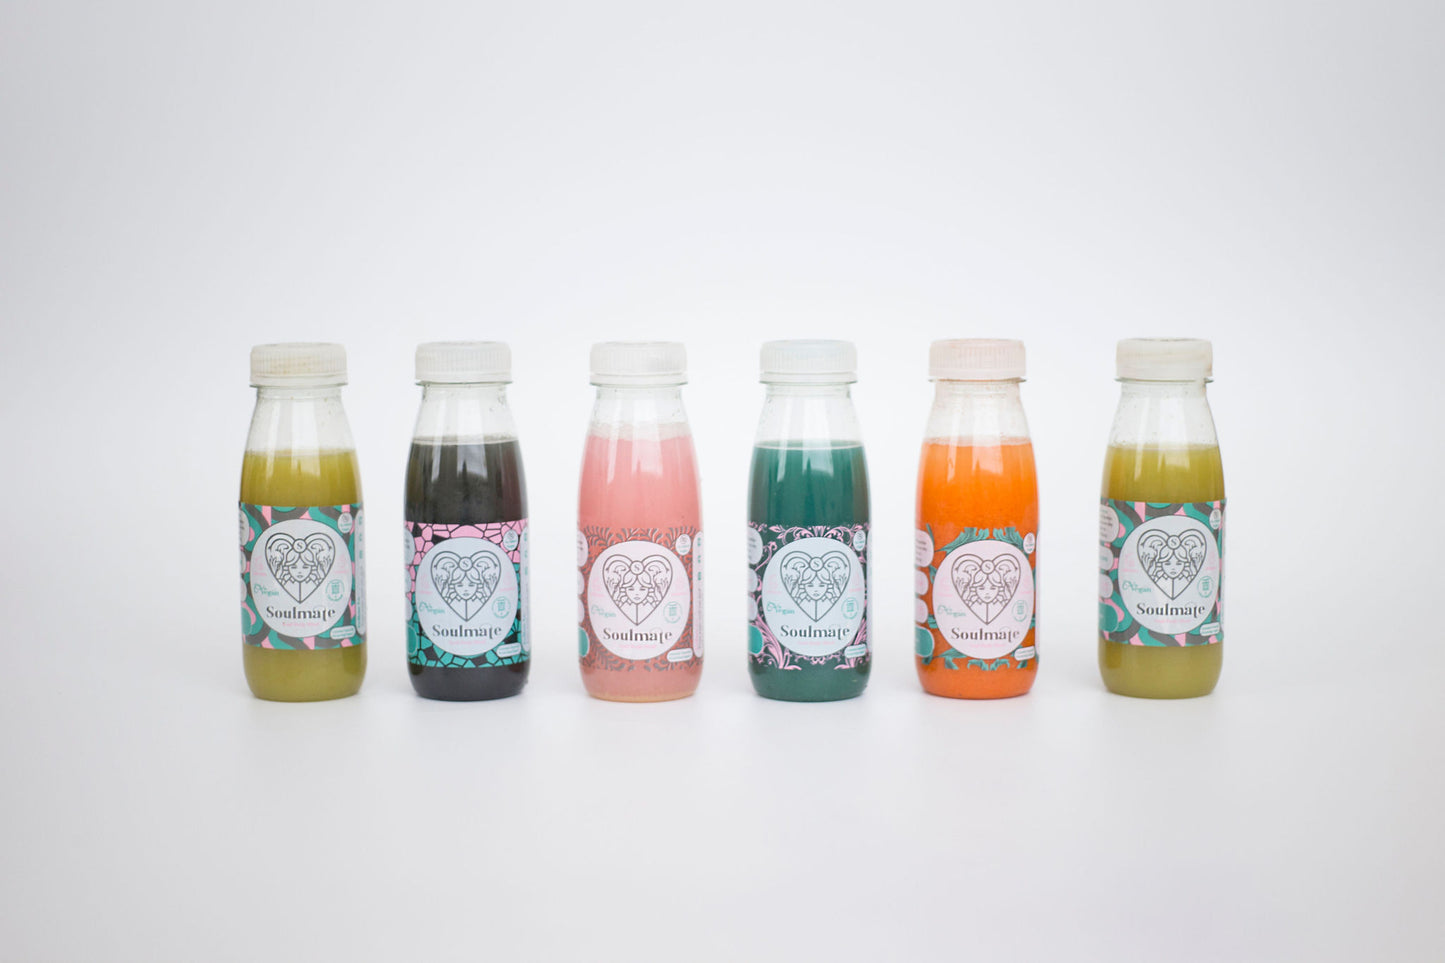 1 Day Cold-Pressed Juice Cleanse Package